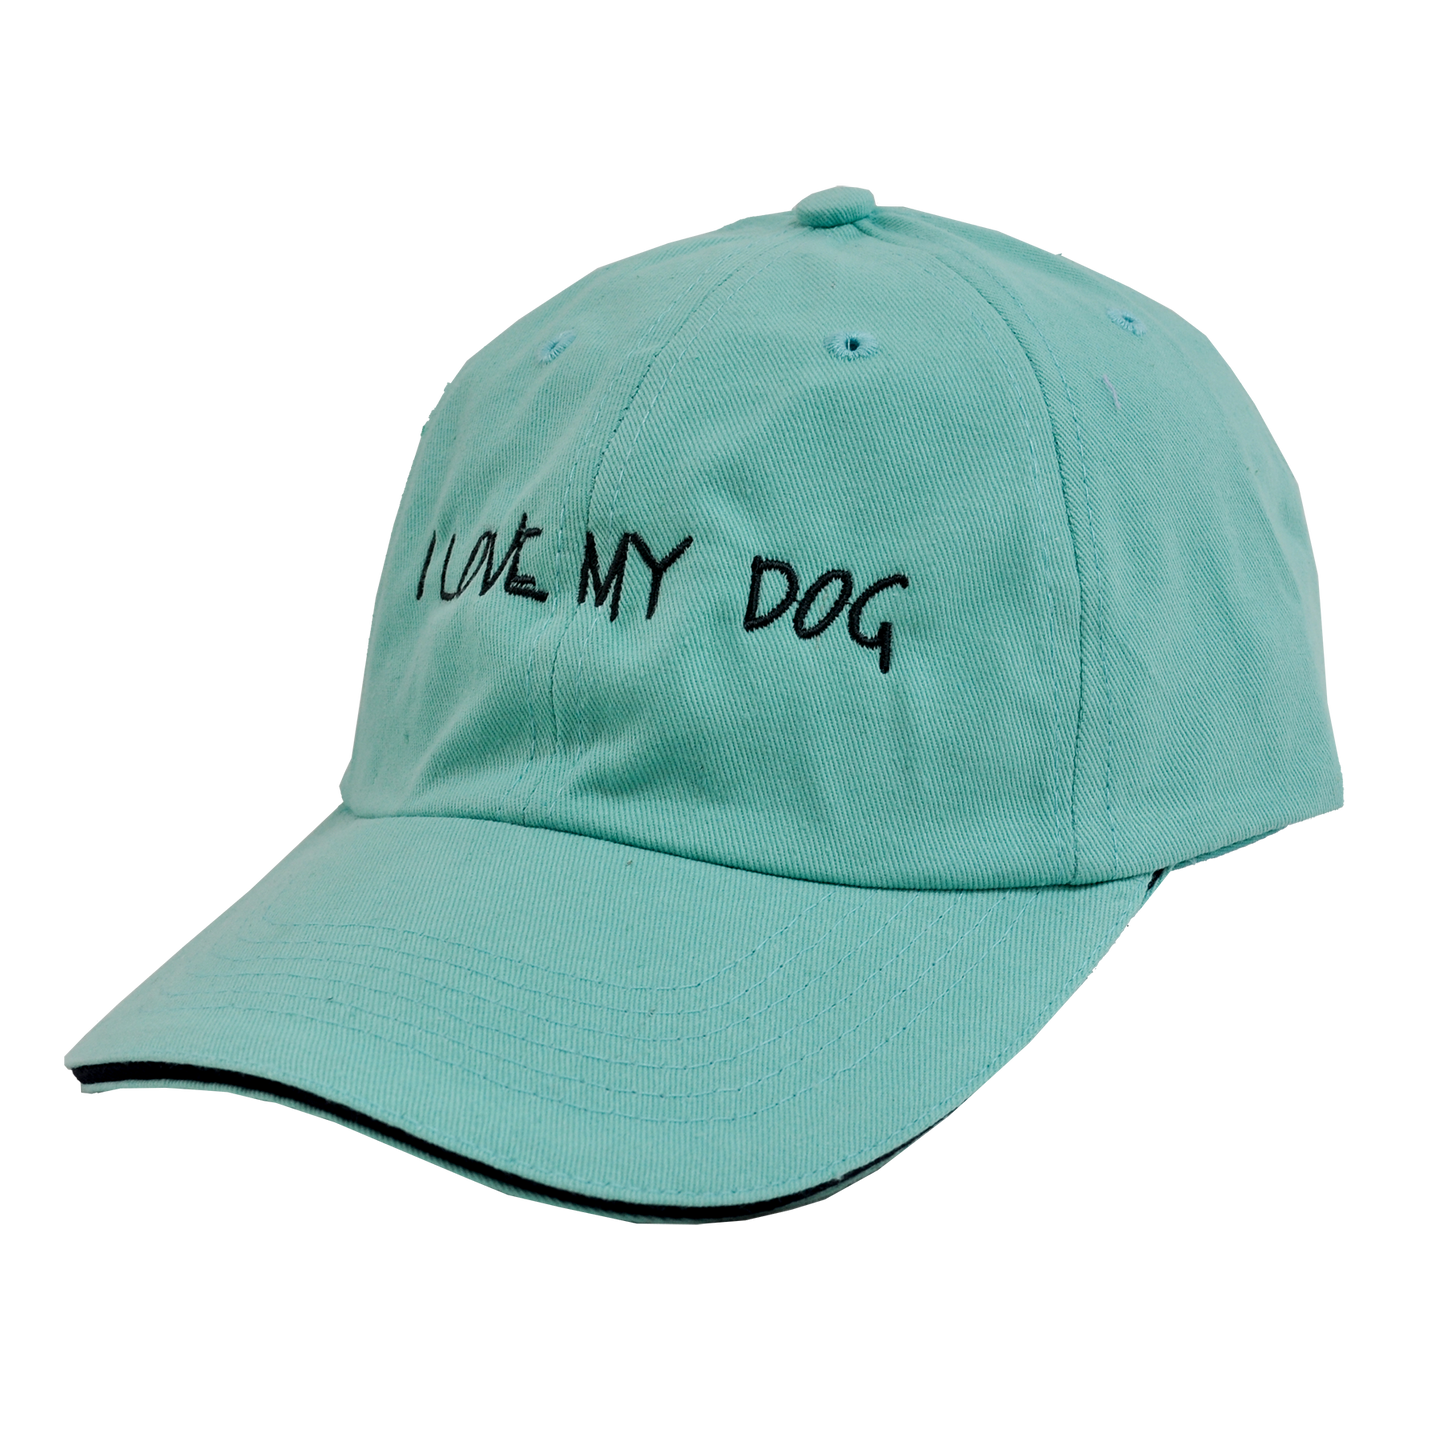 Pet Collection "I Love My Dog" 100% Cotton Adjustable Sports Cap.